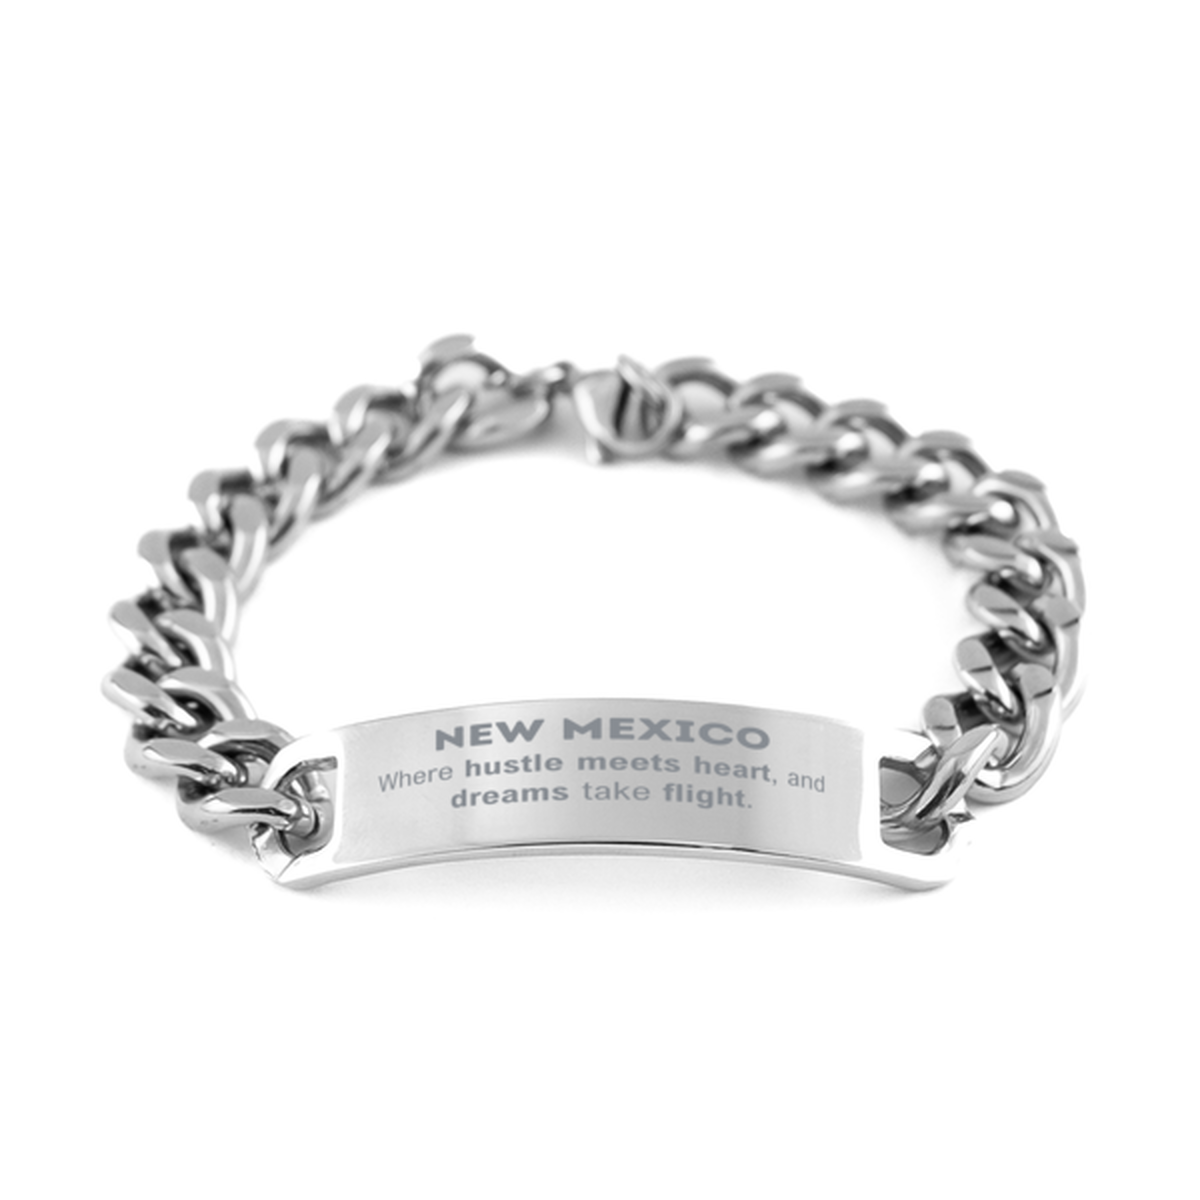 New Mexico: Where hustle meets heart, and dreams take flight, New Mexico Gifts, Proud New Mexico Christmas Birthday New Mexico Cuban Chain Stainless Steel Bracelet, New Mexico State People, Men, Women, Friends